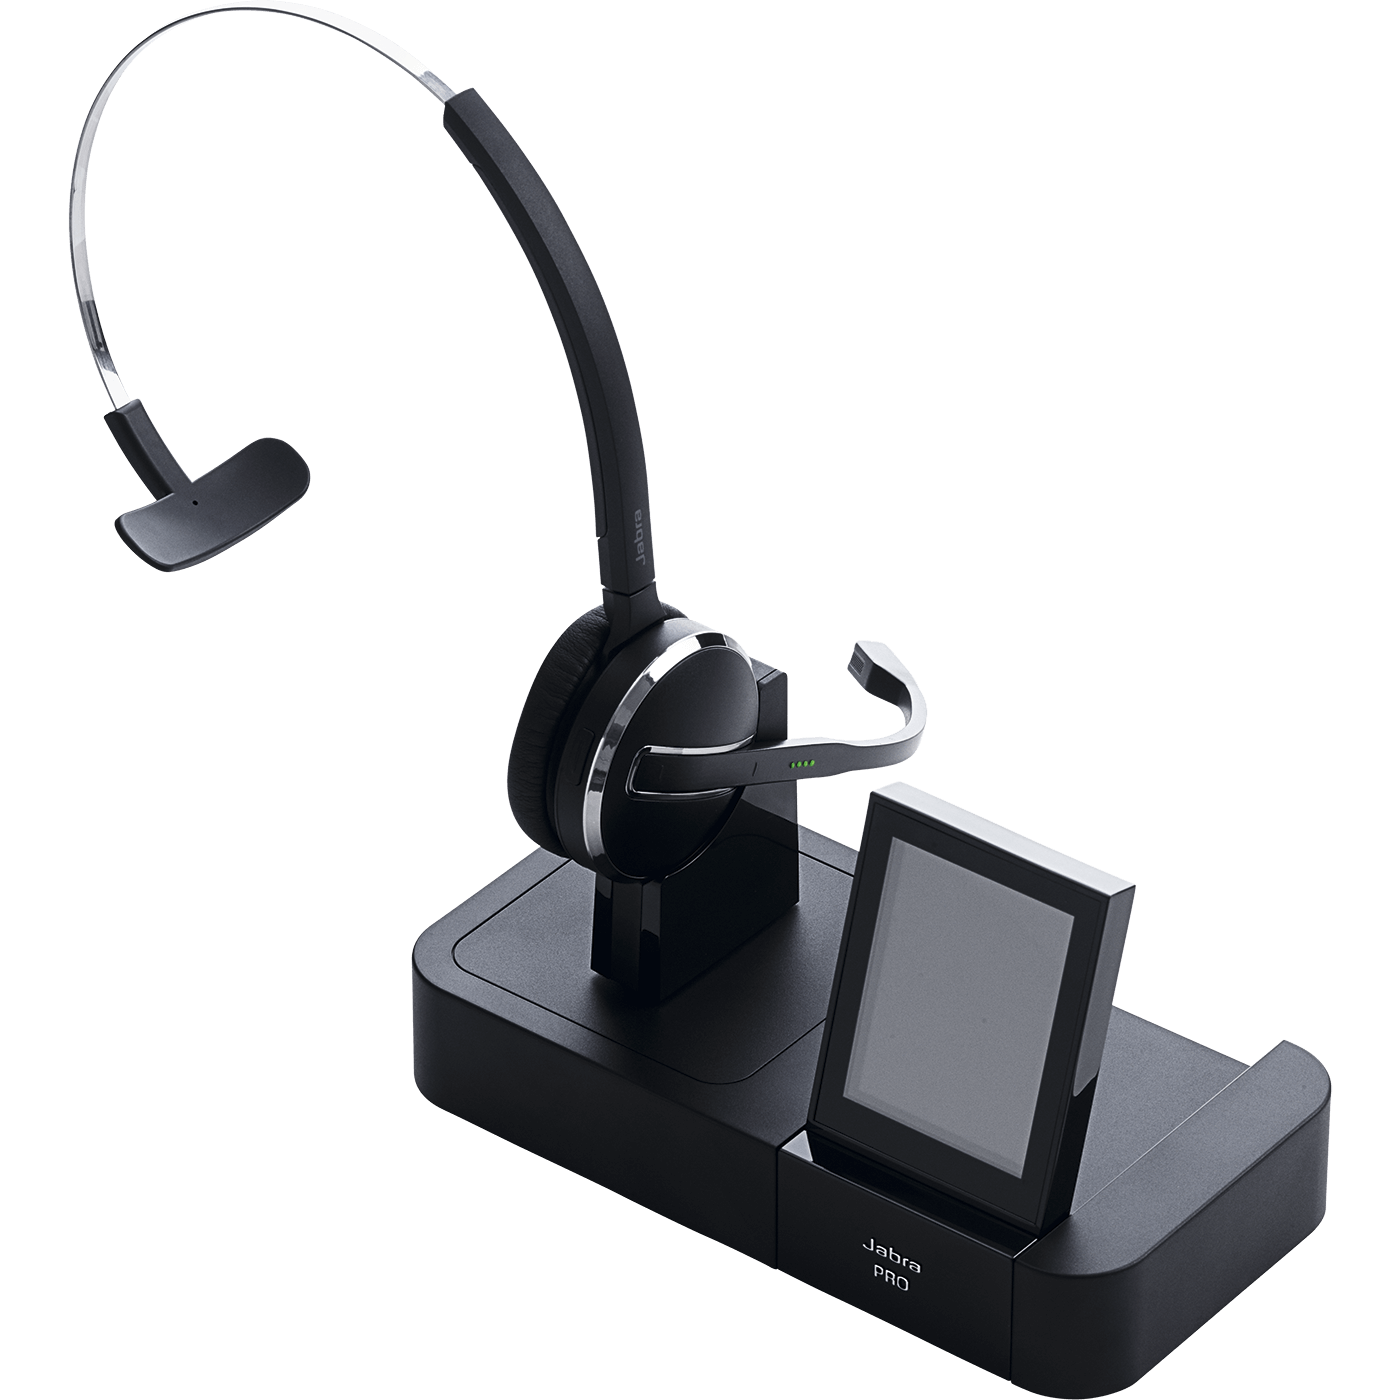 Get started with your Jabra Pro 9460 Mono | Jabra Support